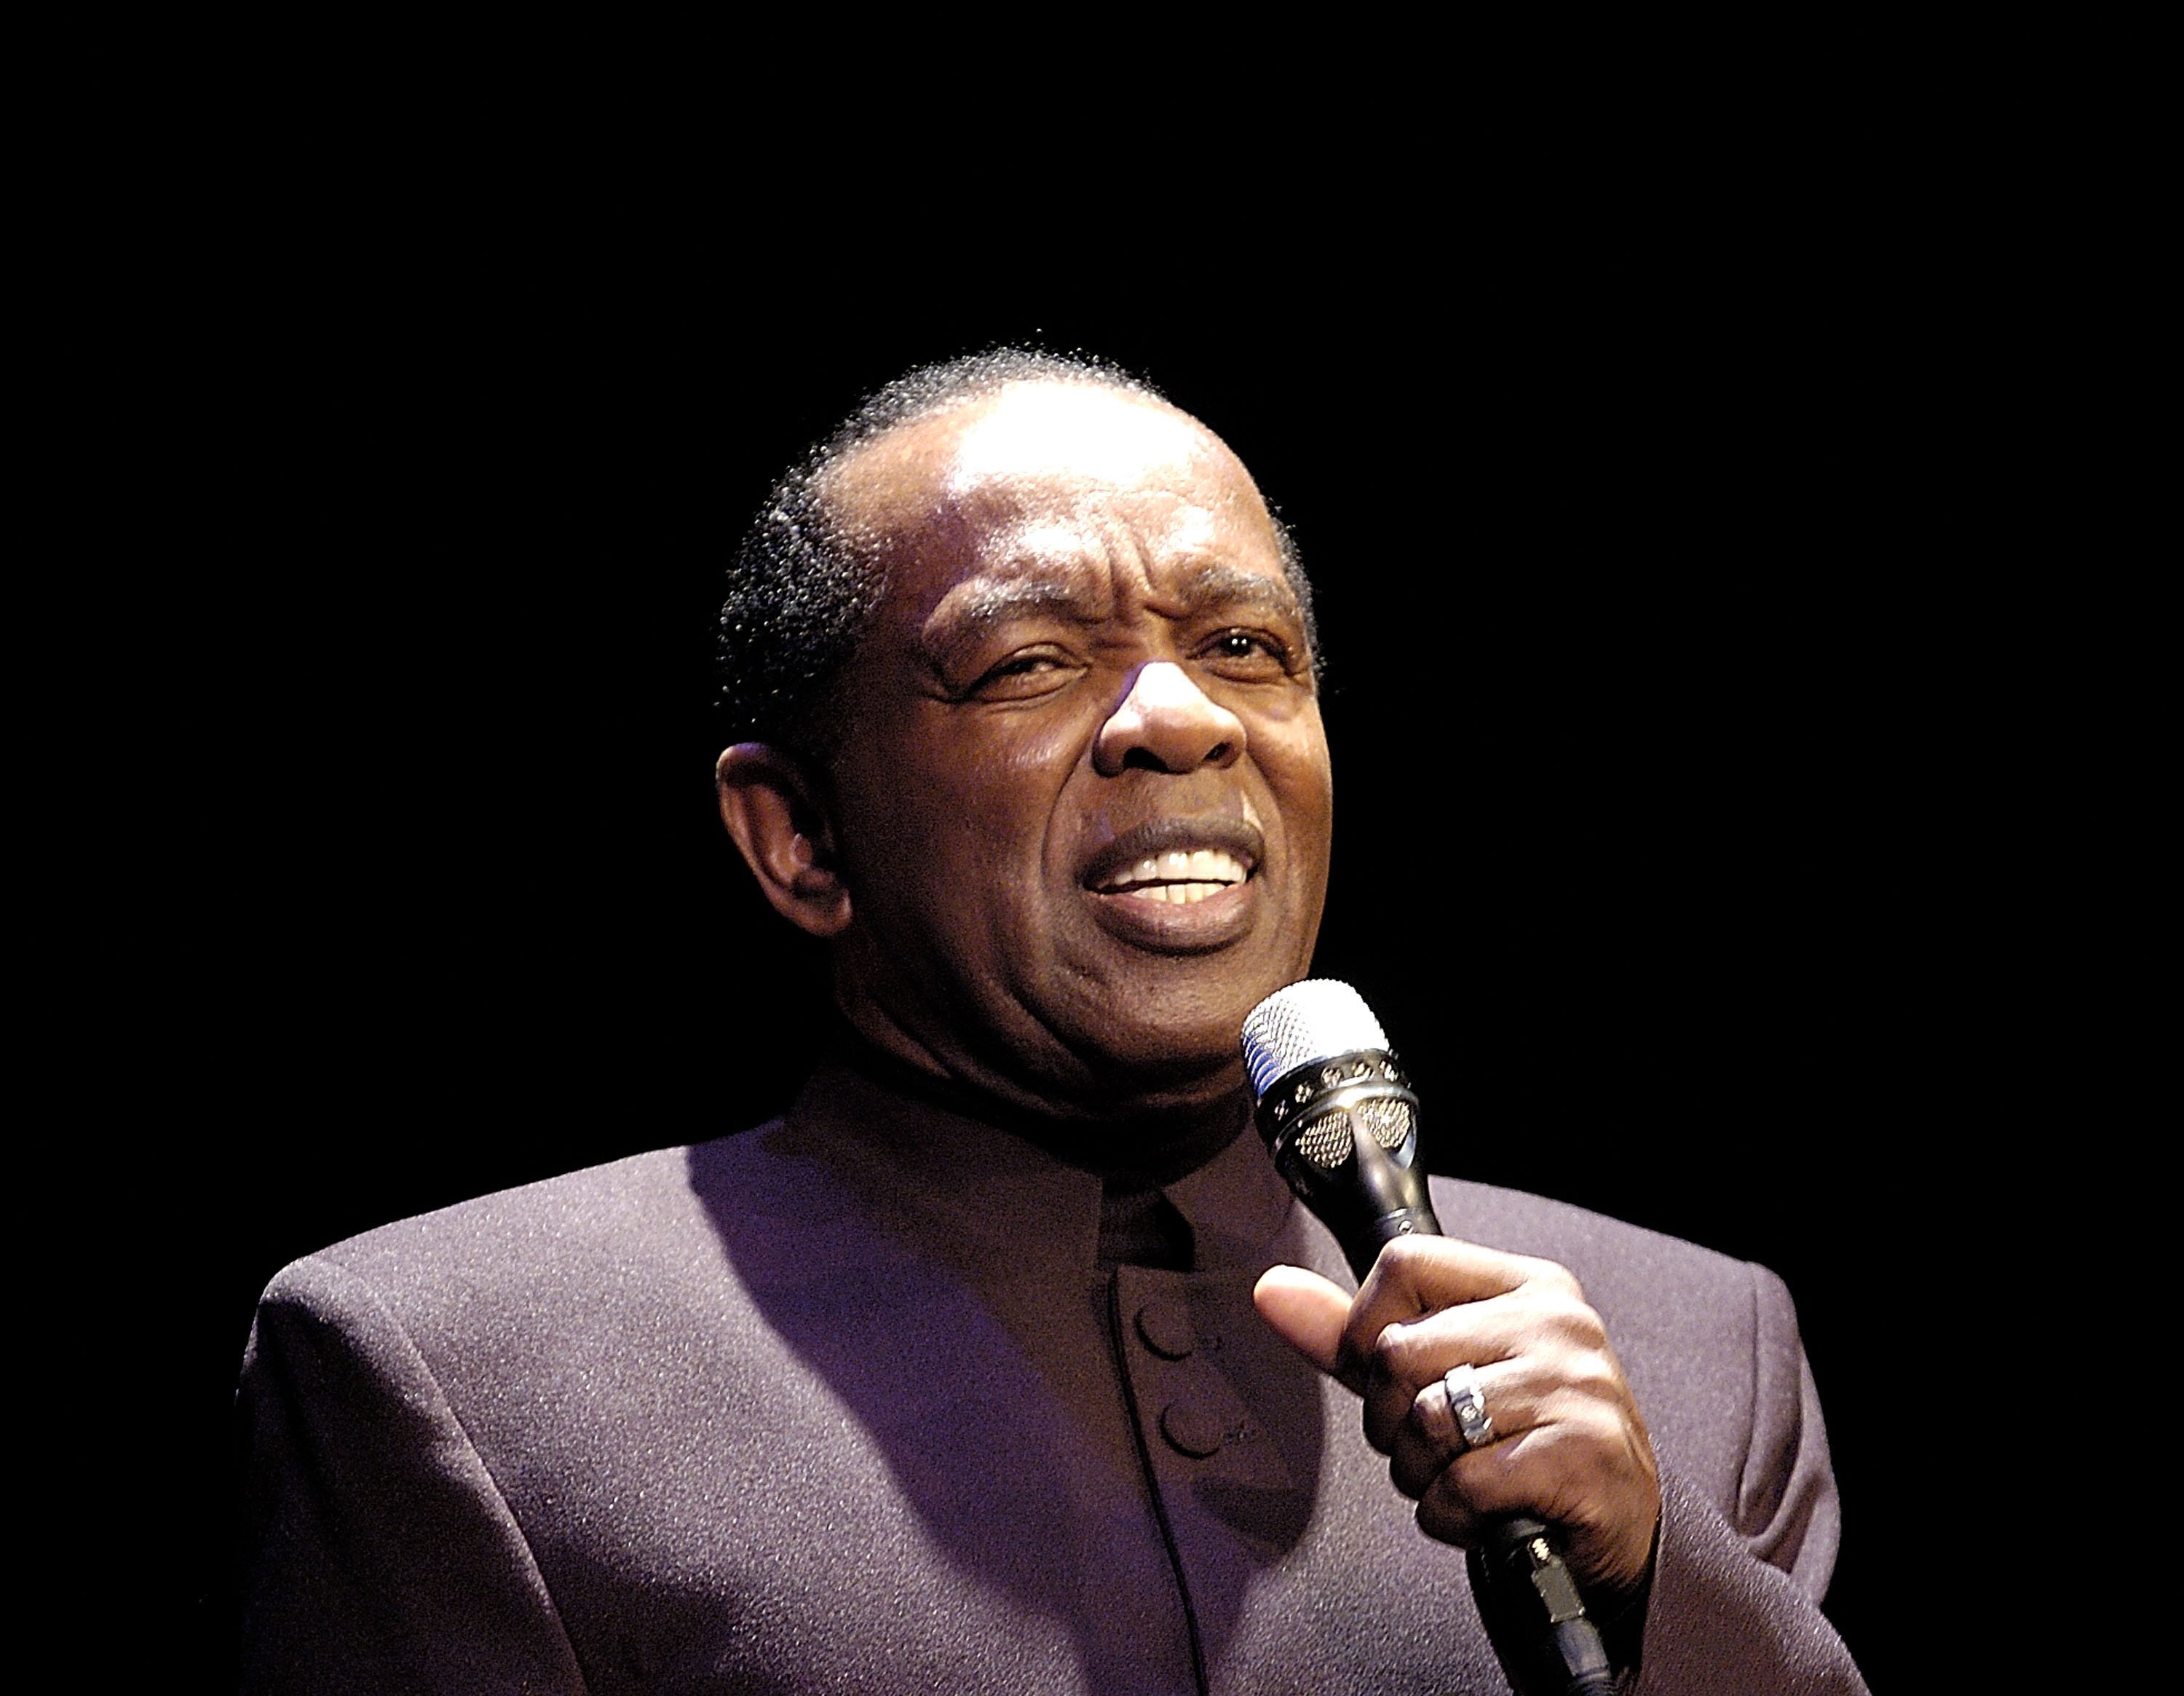 Singer Lou Rawls performs at the inaugural event for the Lou Rawls Center For The Performing Arts located at Florida Memorial College on February 3, 2005 in Miami, Florida. | Source: Getty Images